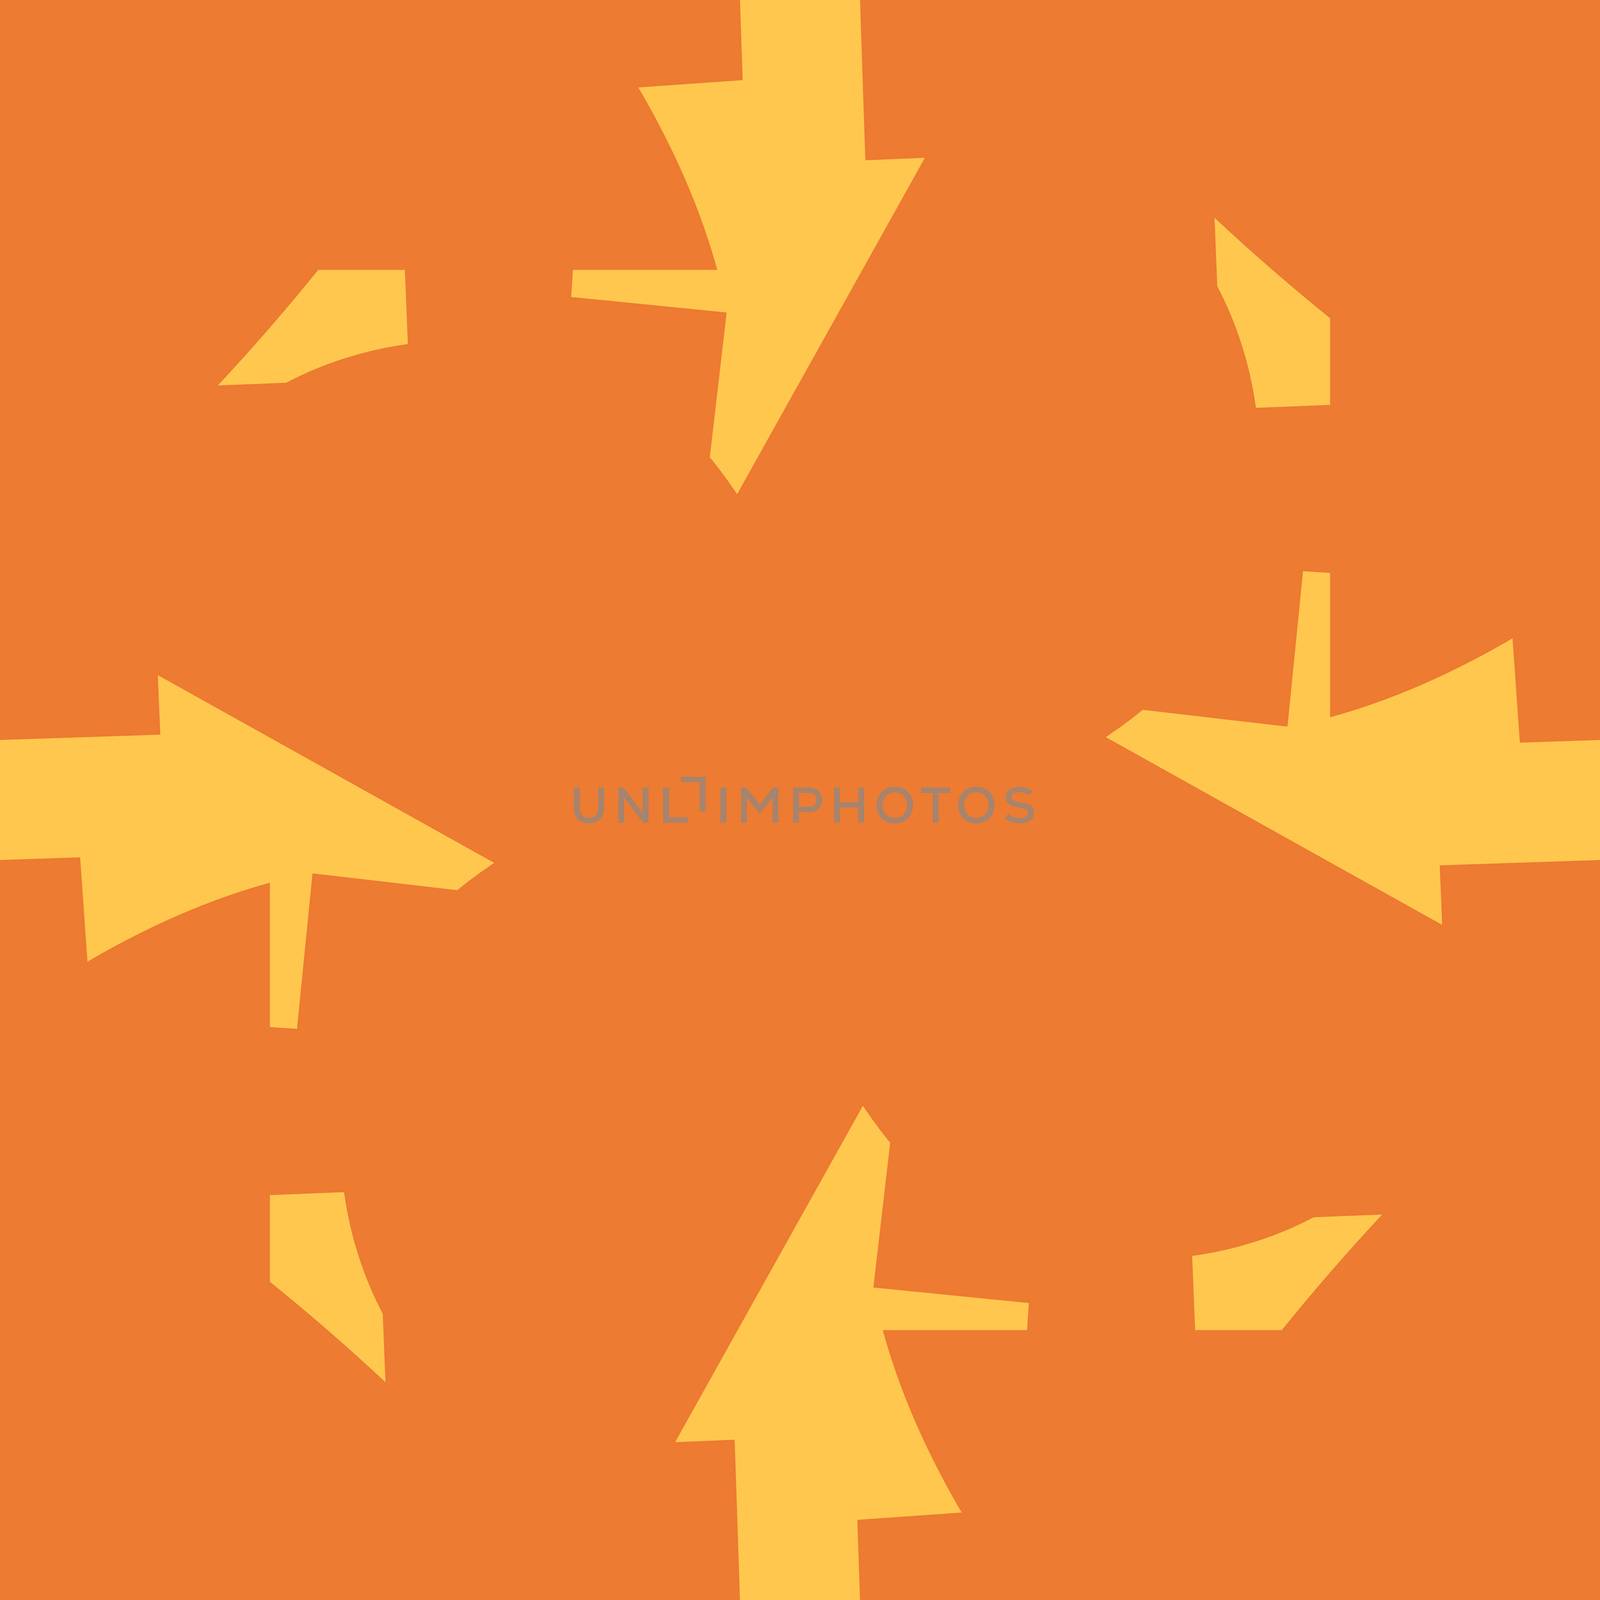 Repeating background pattern of abstract orange arrows